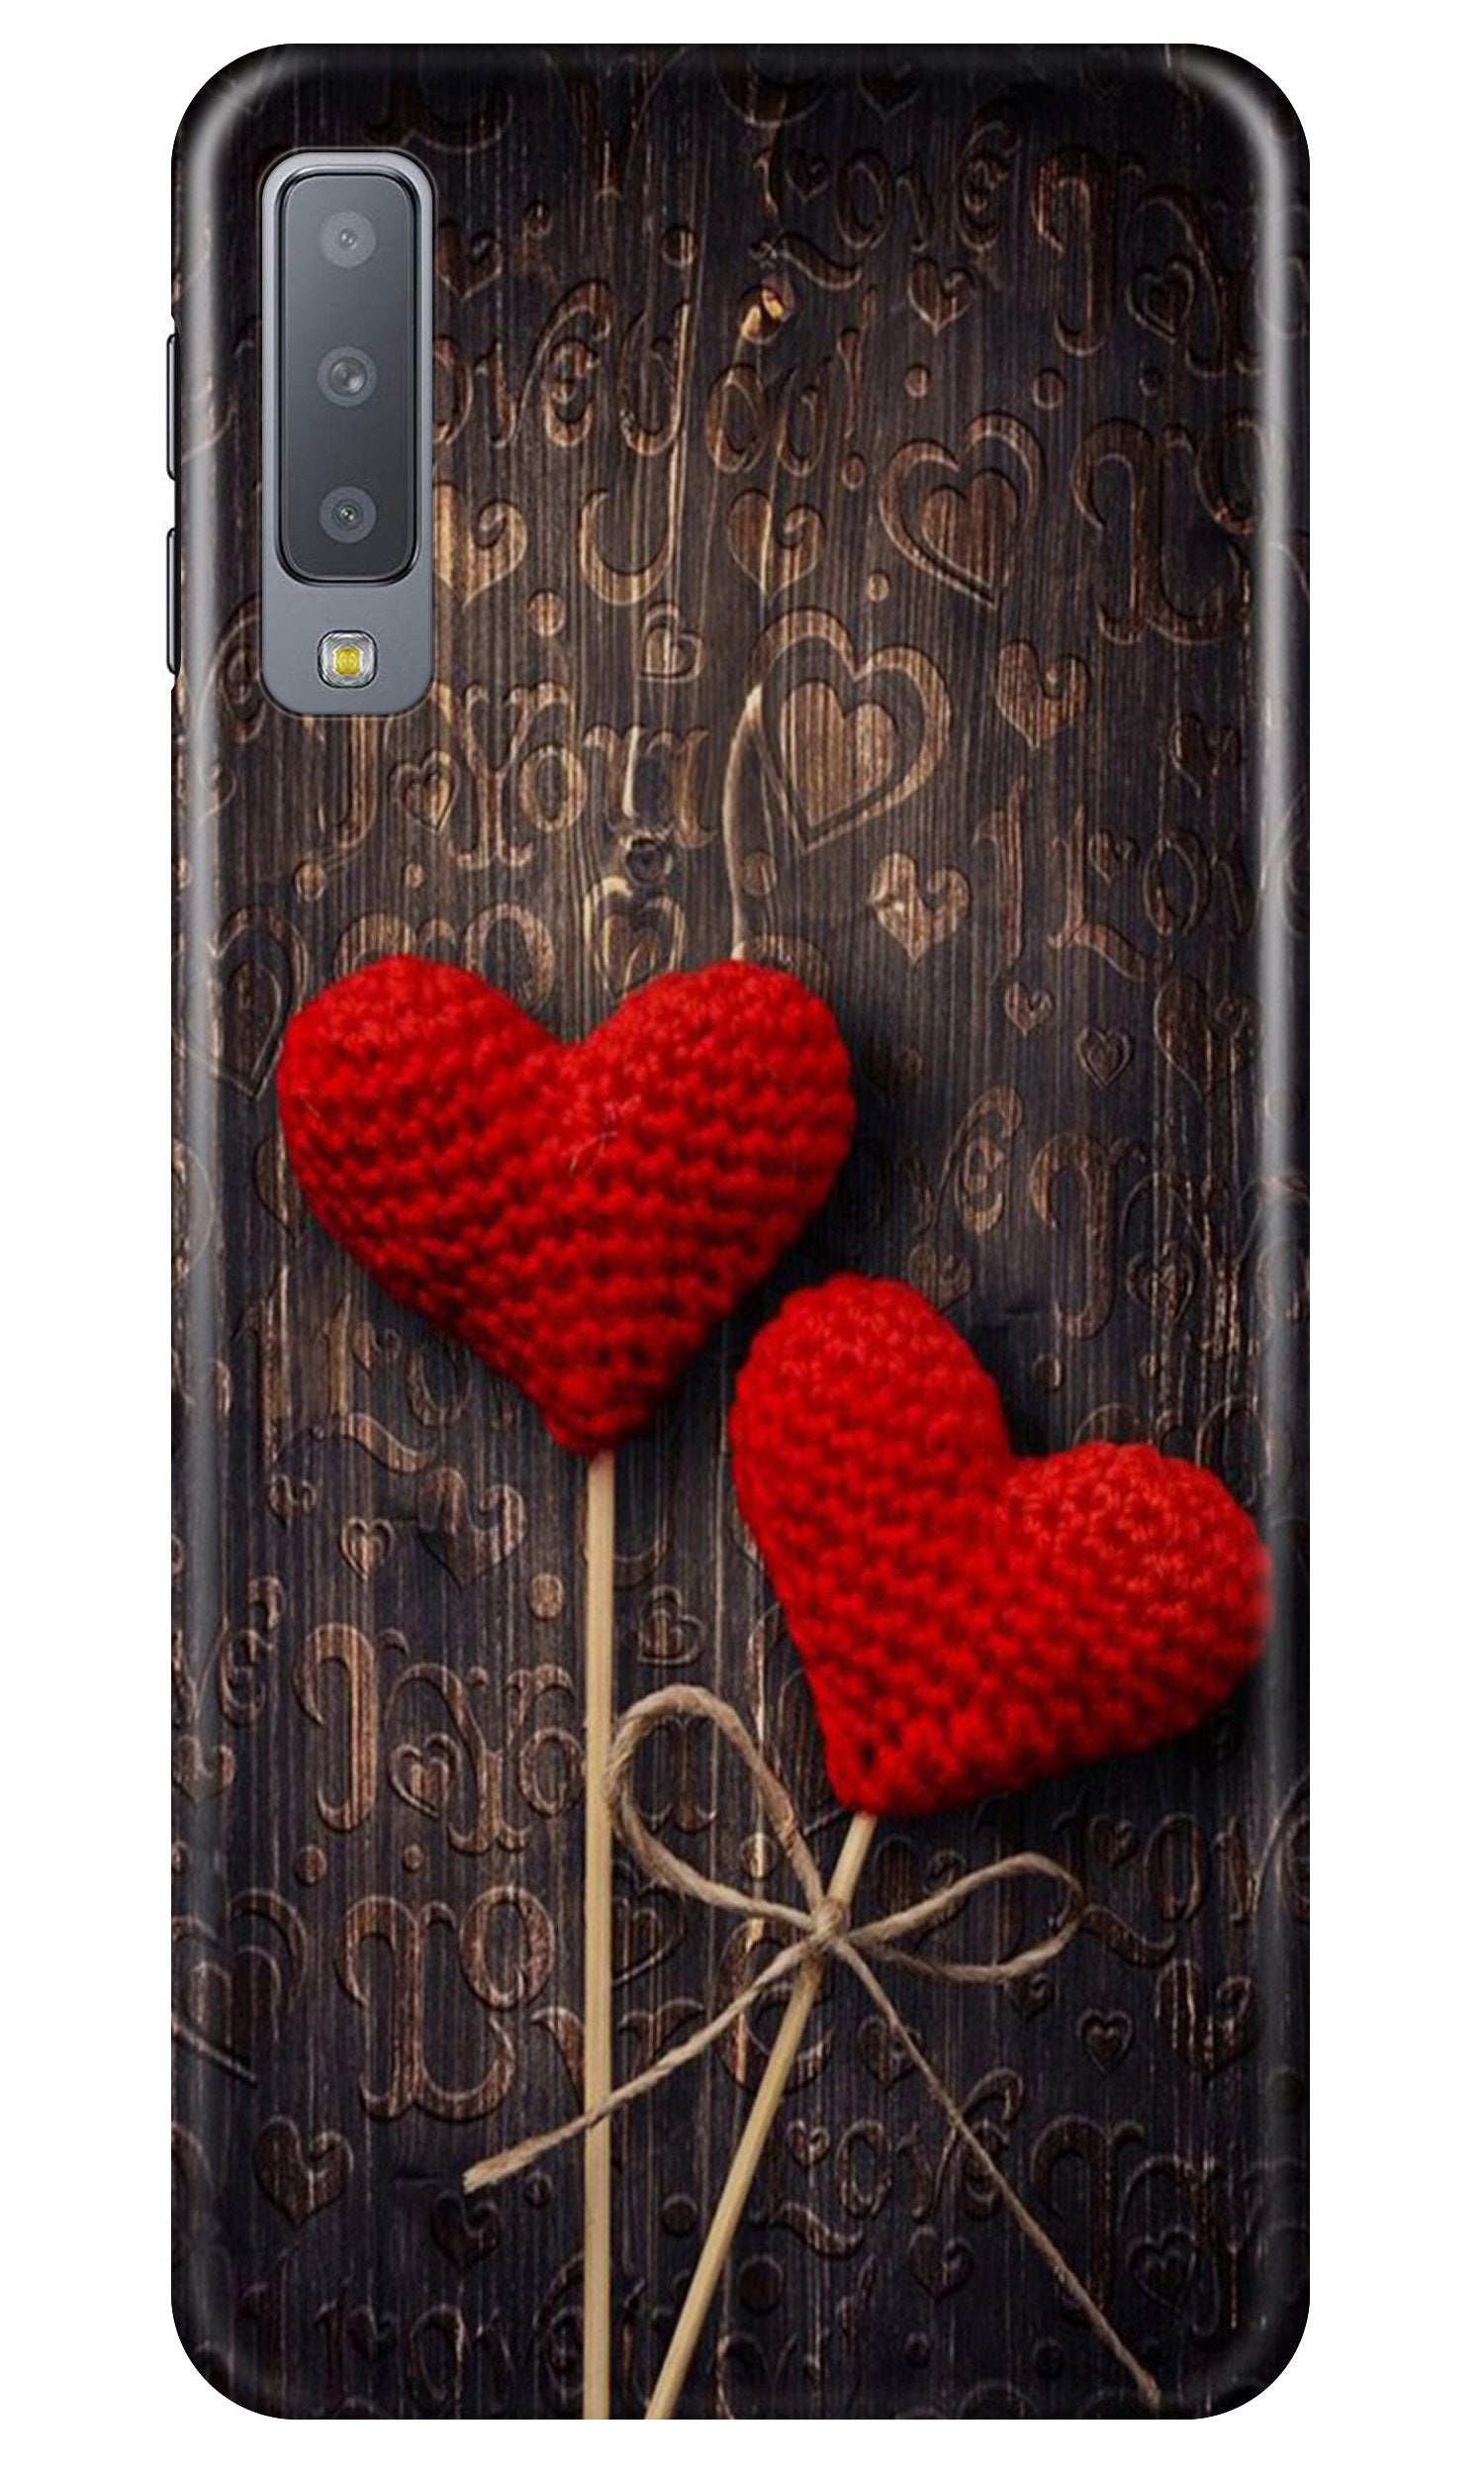 Red Hearts Case for Galaxy A7 (2018)